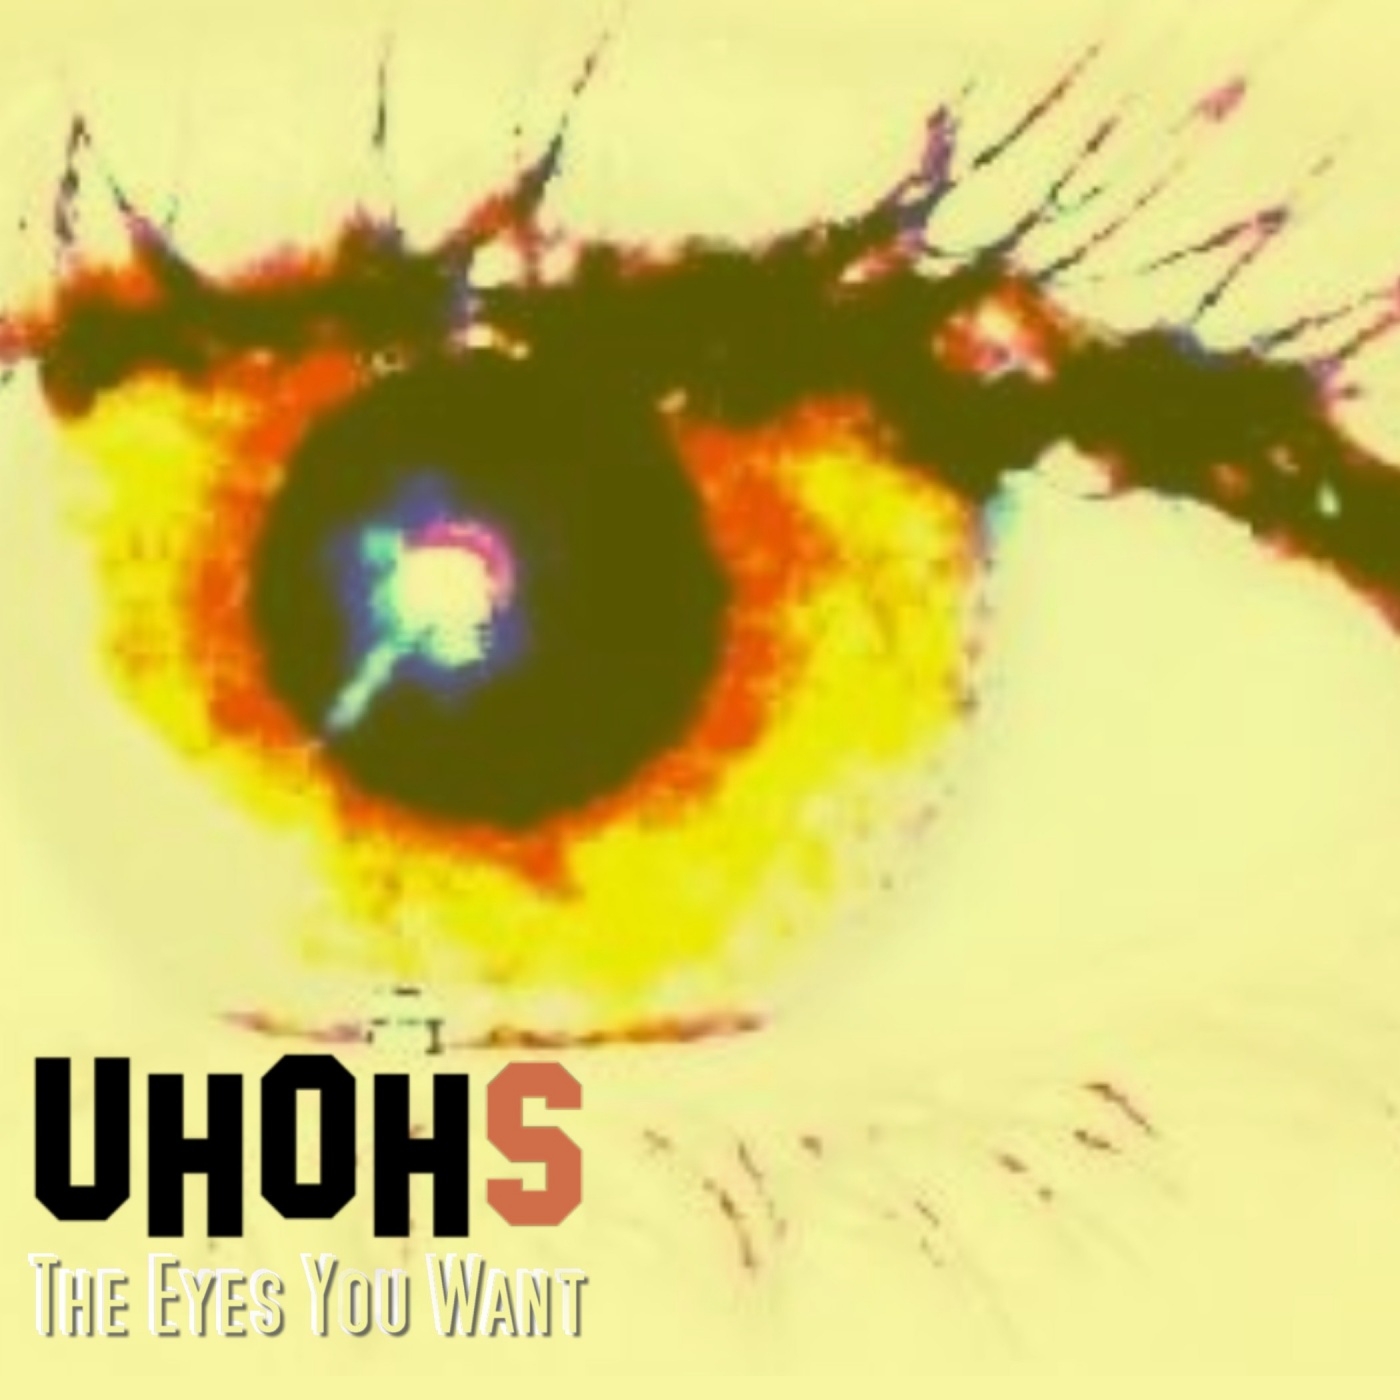 THE EYES YOU WANT